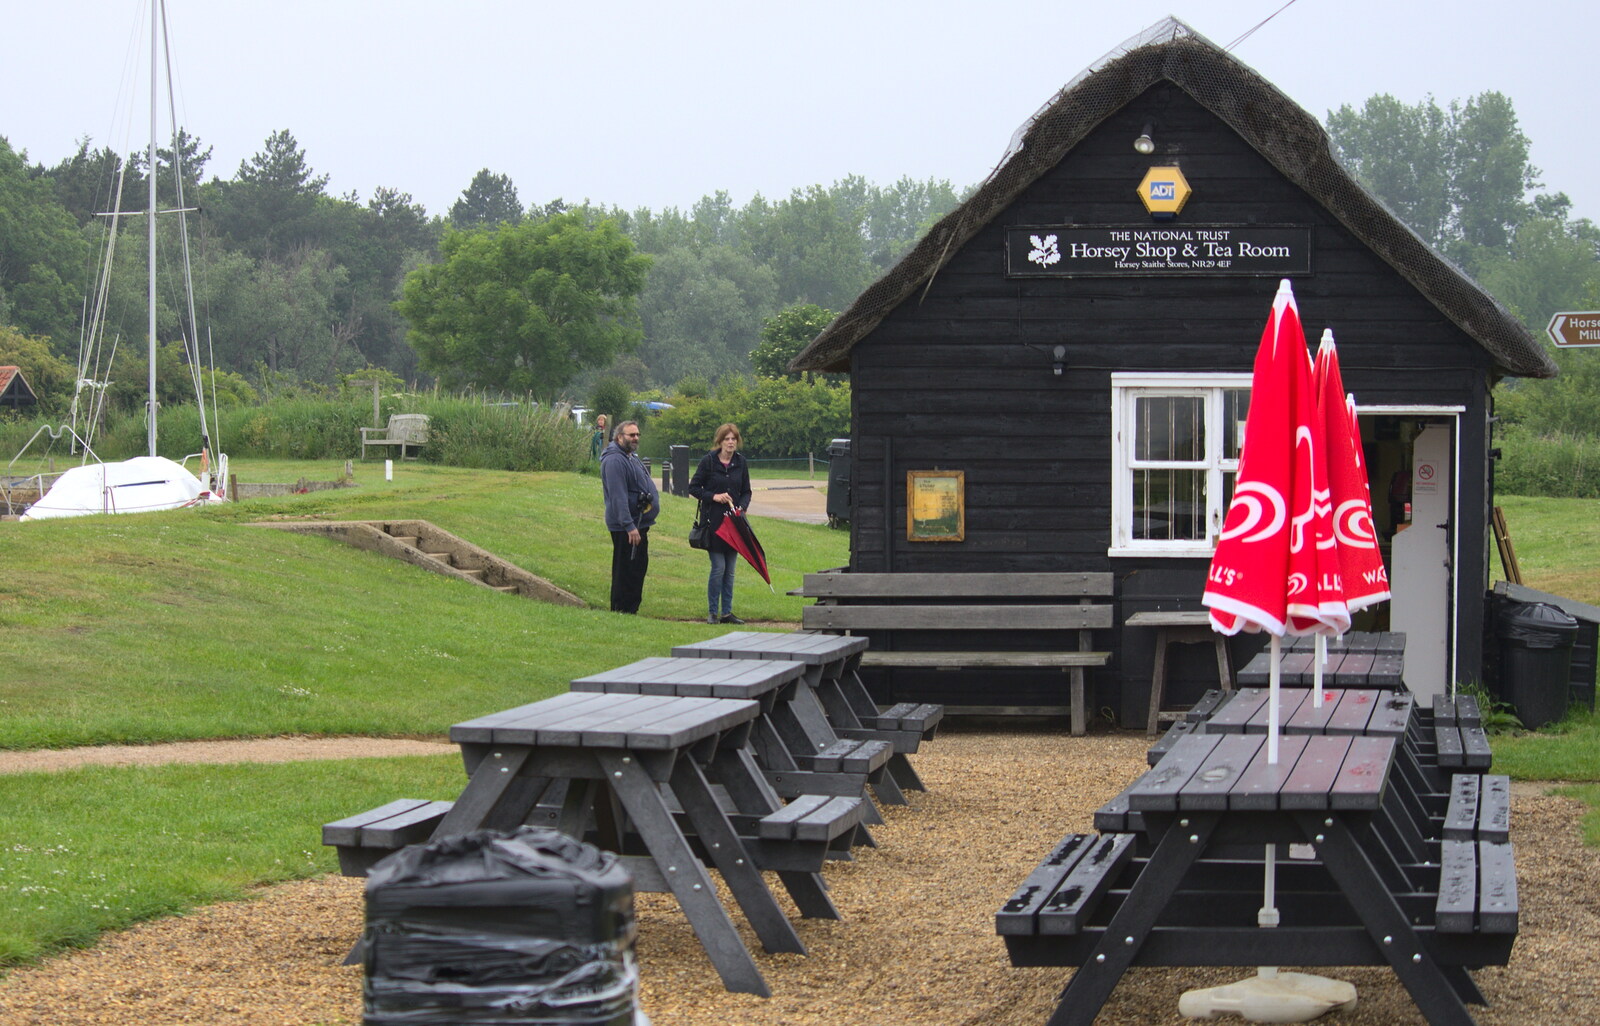 The National Trust café at Horsey from A Wet Weekend of Camping, Waxham Sands, Norfolk - 13th June 2015